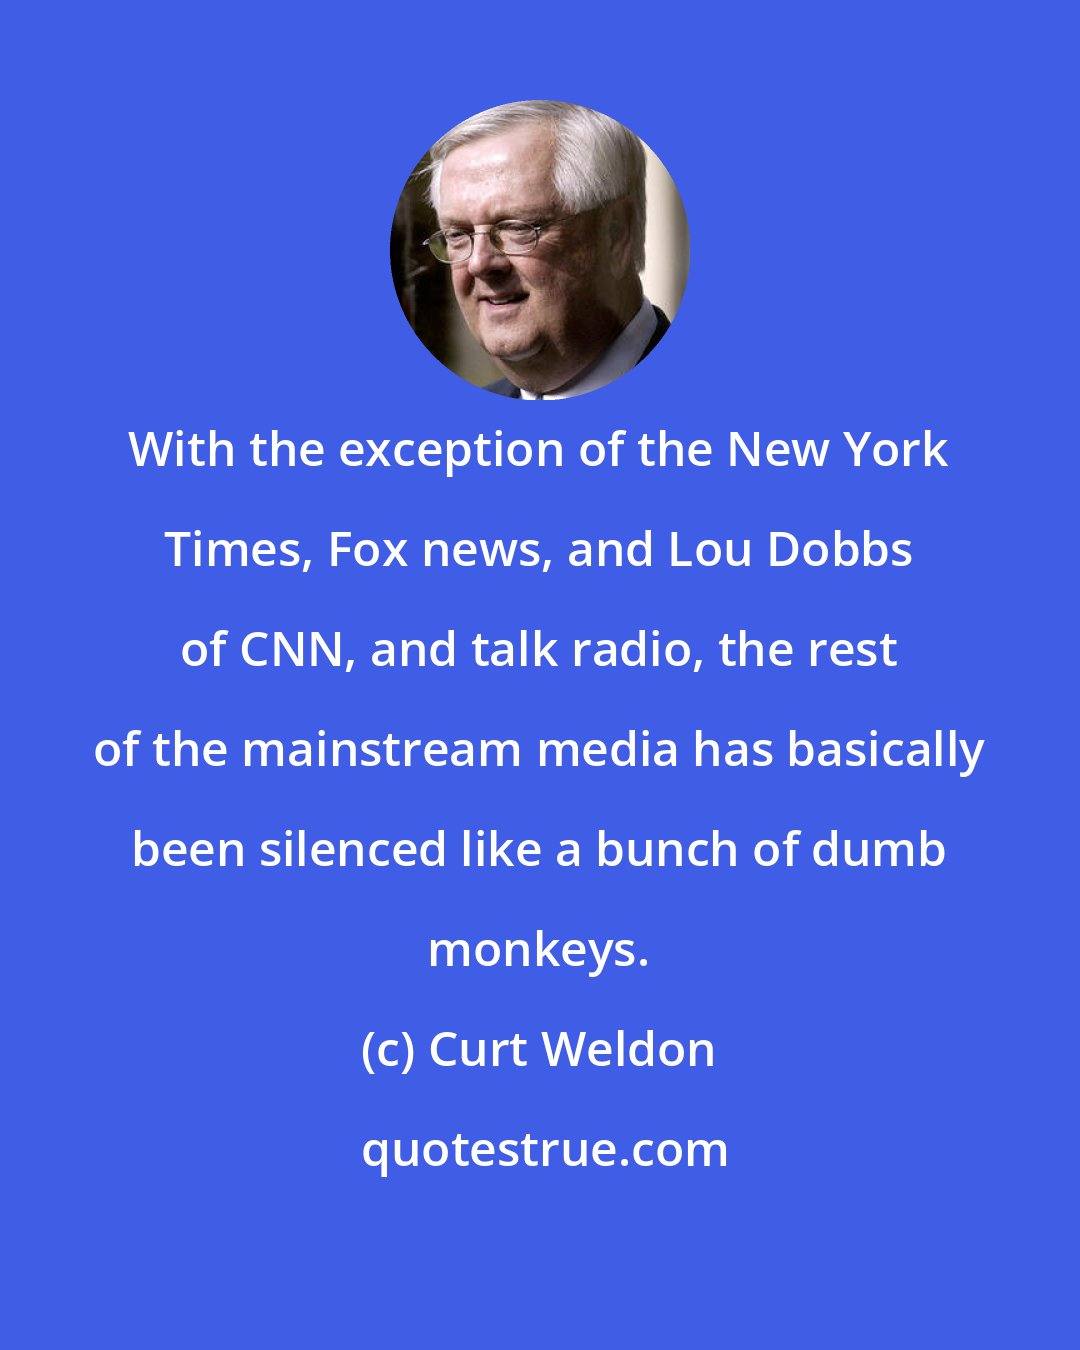 Curt Weldon: With the exception of the New York Times, Fox news, and Lou Dobbs of CNN, and talk radio, the rest of the mainstream media has basically been silenced like a bunch of dumb monkeys.